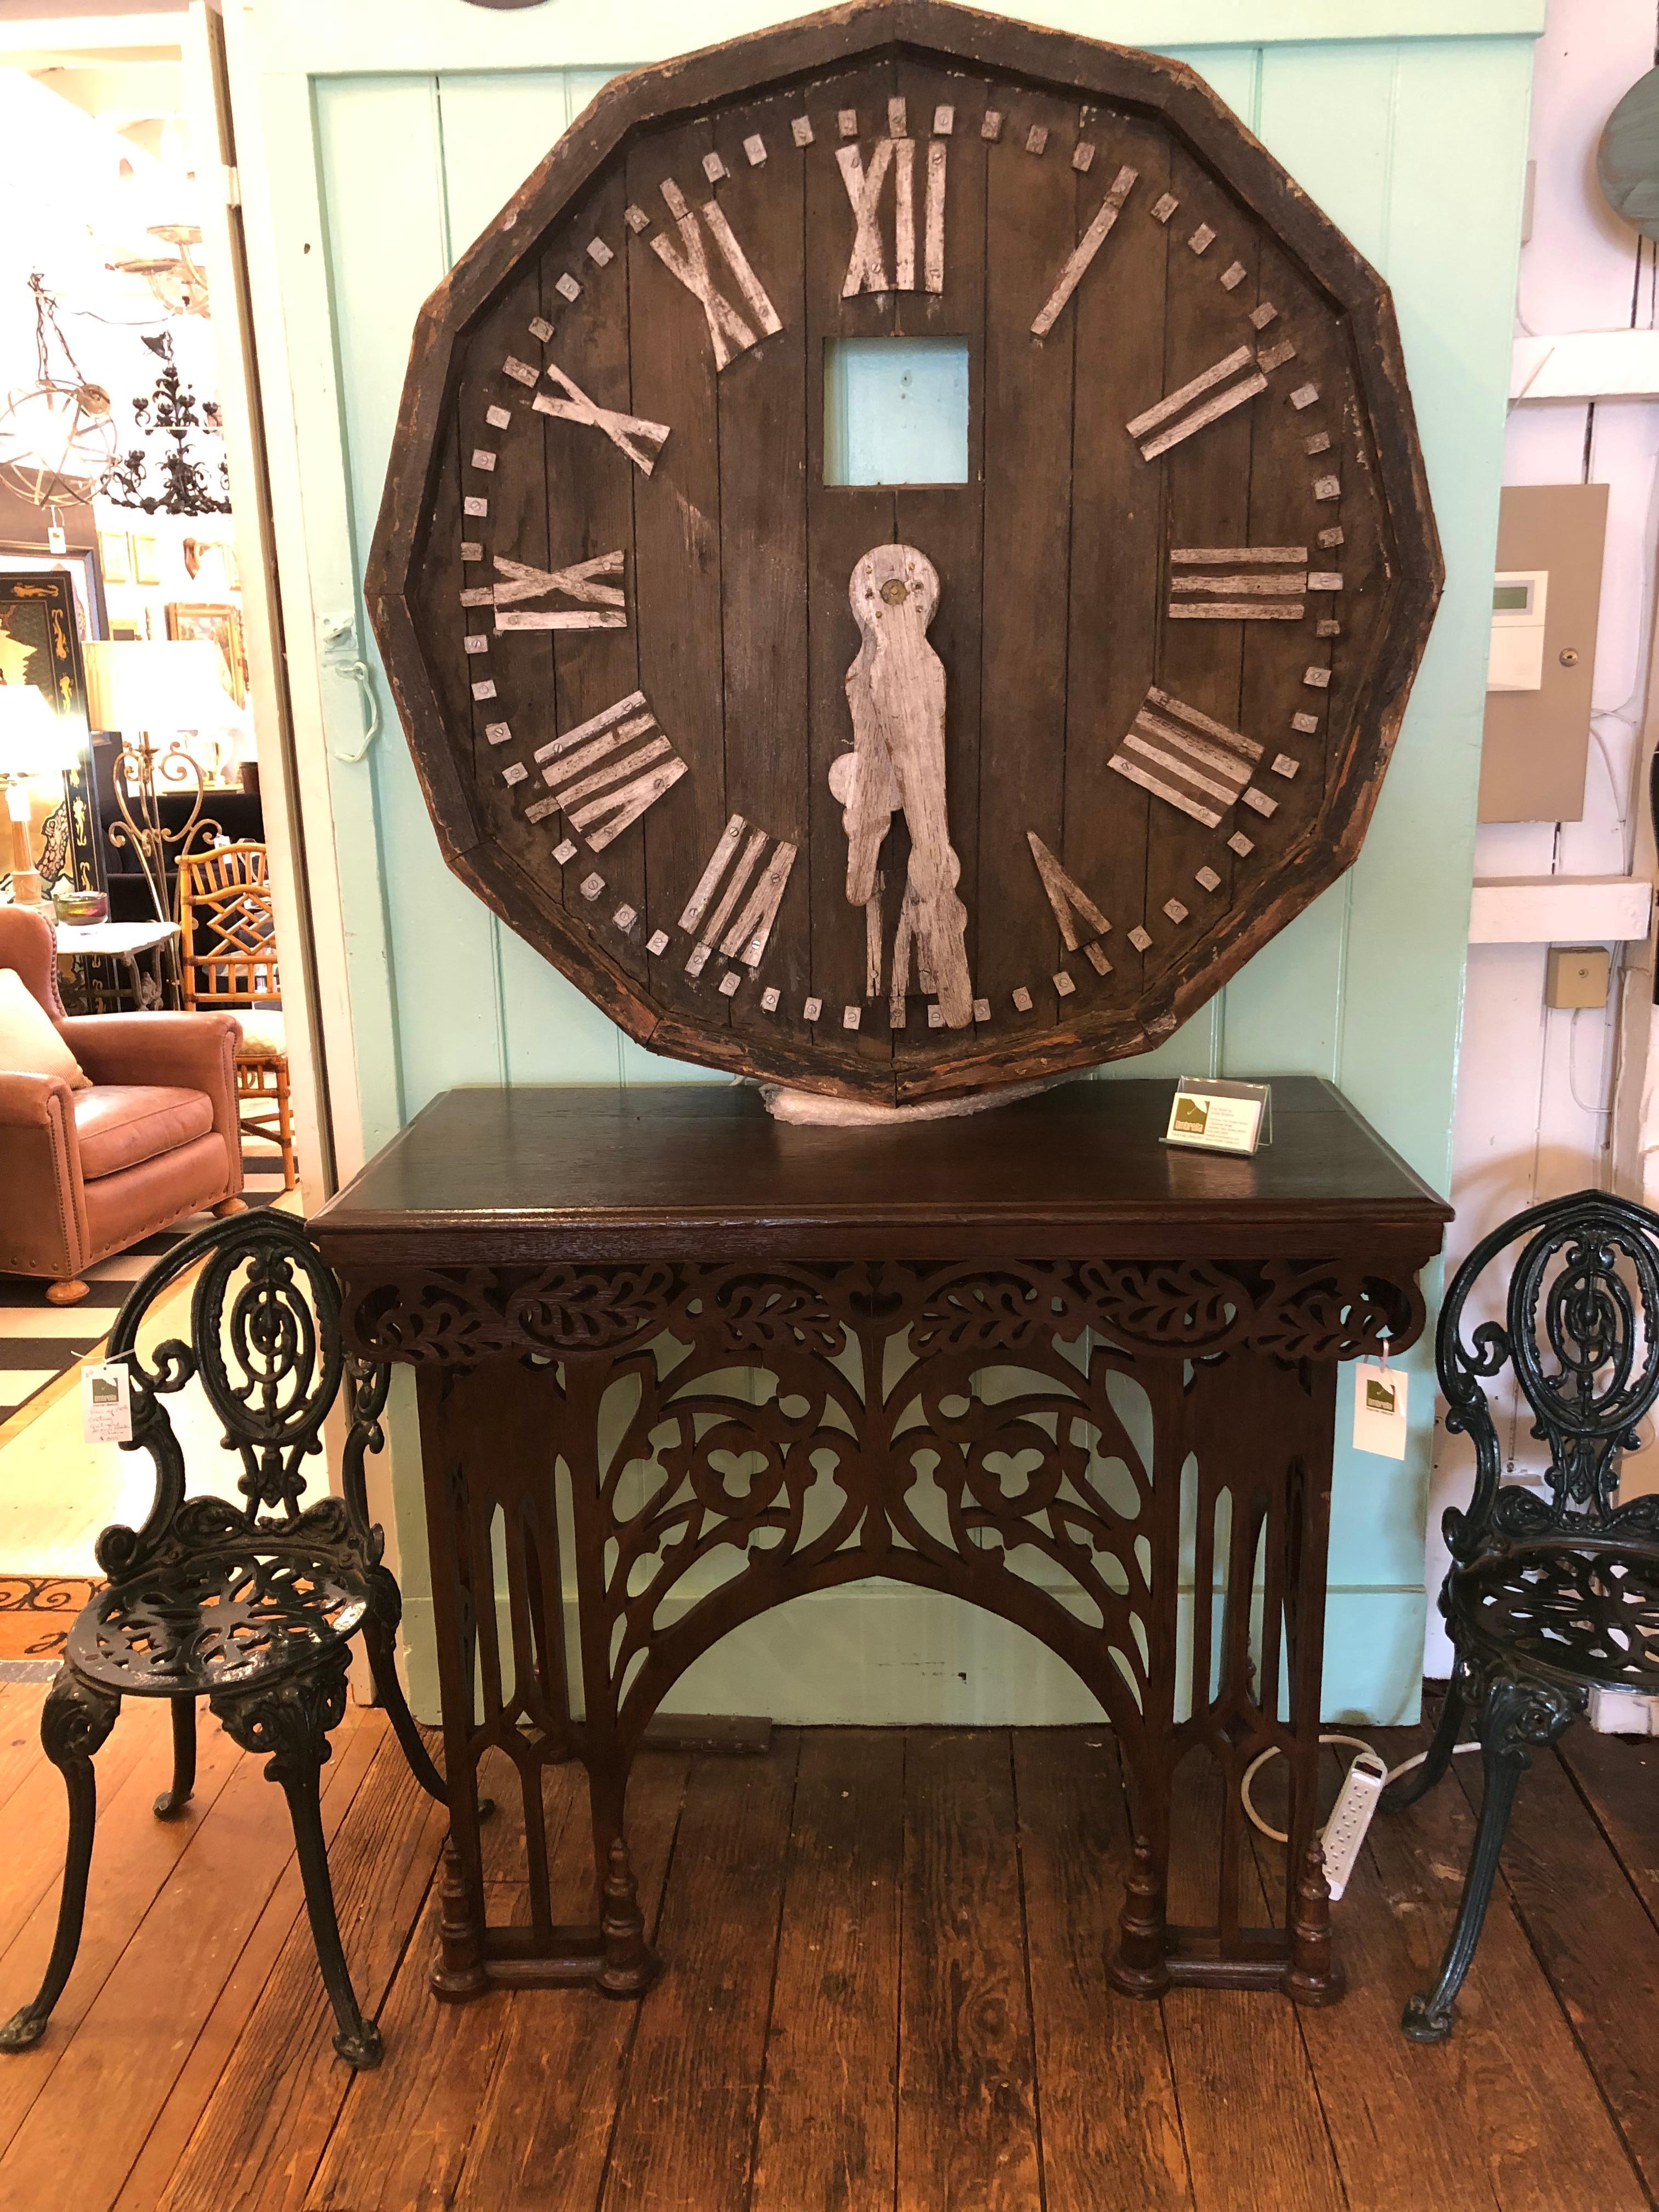 Strikingly large architectural found clock face having distressed wood with tons of character.  Must have worked at one time, as there is an electrical box affixed to the back which we are selling as is.  Makes a great wall sculpture and found